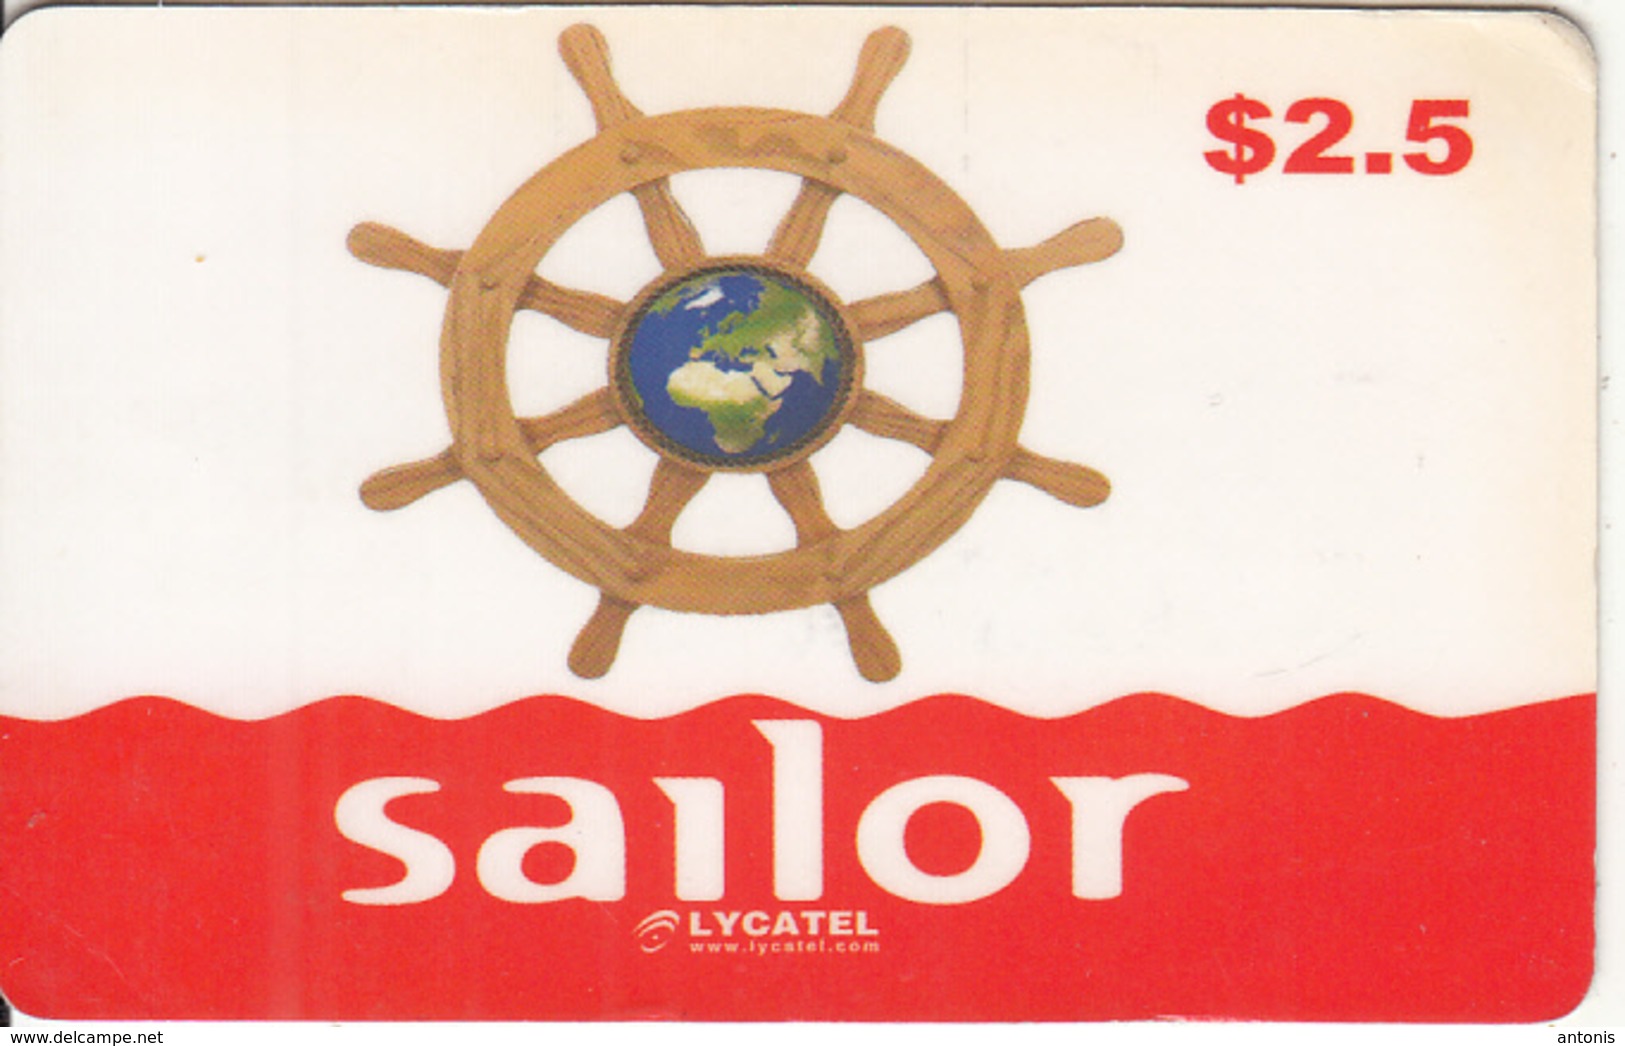 CANADA - Sailor, Lycatel Prepaid Card $2.5, Exp.date 25/12/12, Used - Canada